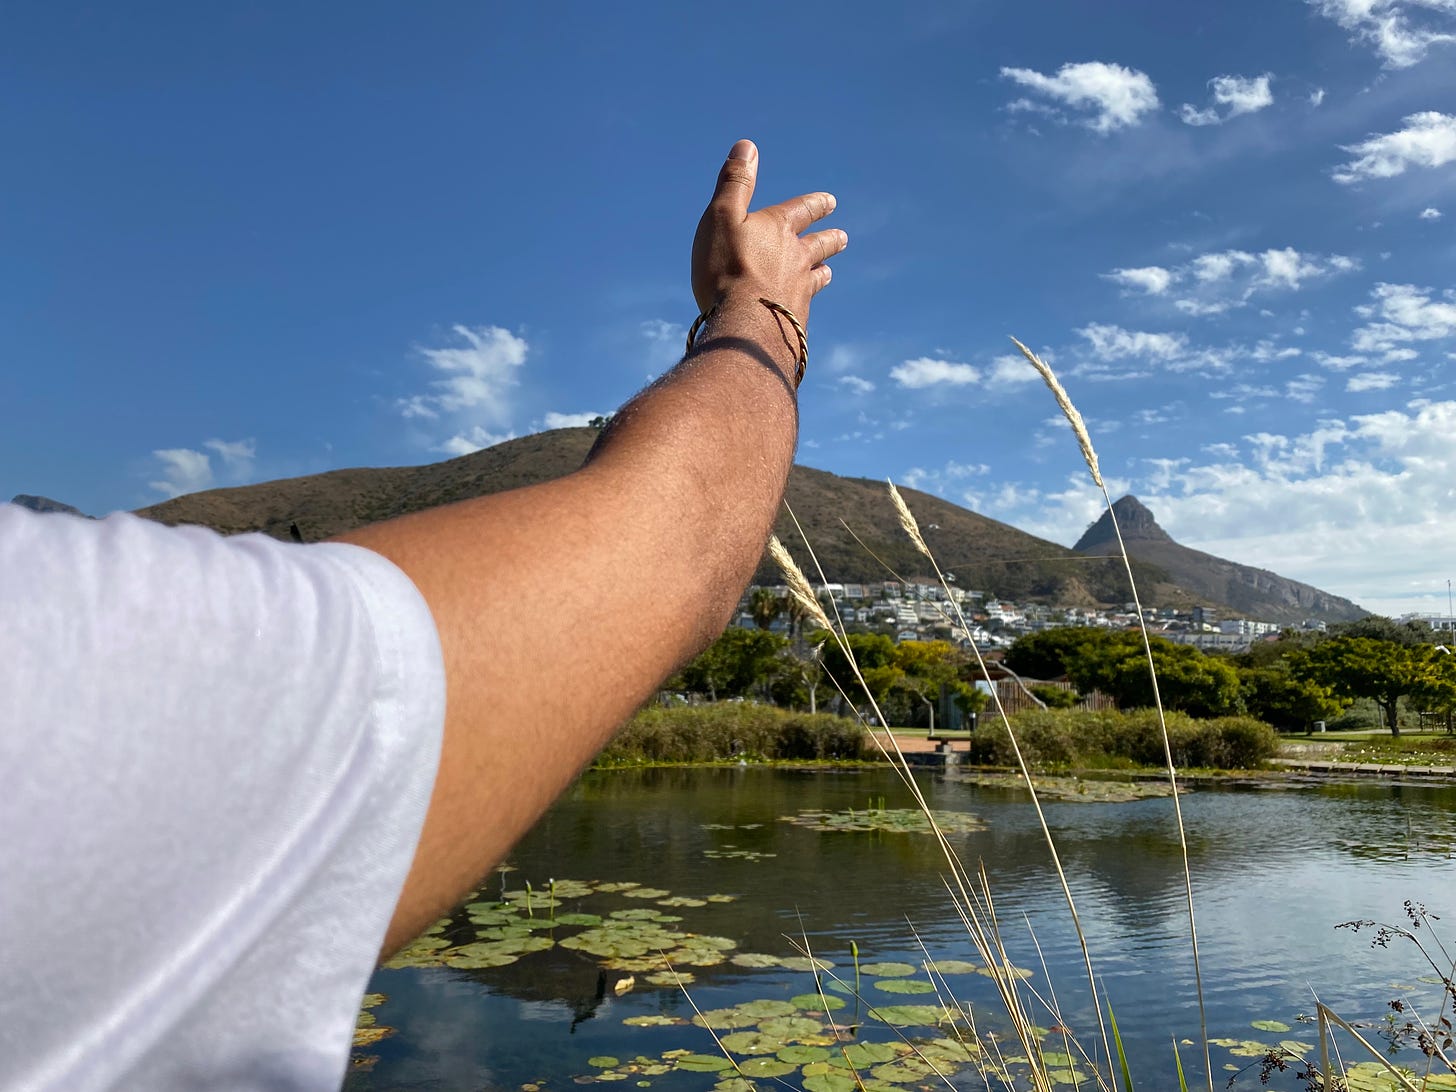 An image of a loved one swiping the sky across Lion’s Head and Signal Hill. There is water down below, lily pads, buildings in the distance, and a bright blue sky. Their arm occupies the center of the image, with their bracelet casting a strong shadow on their arm. 